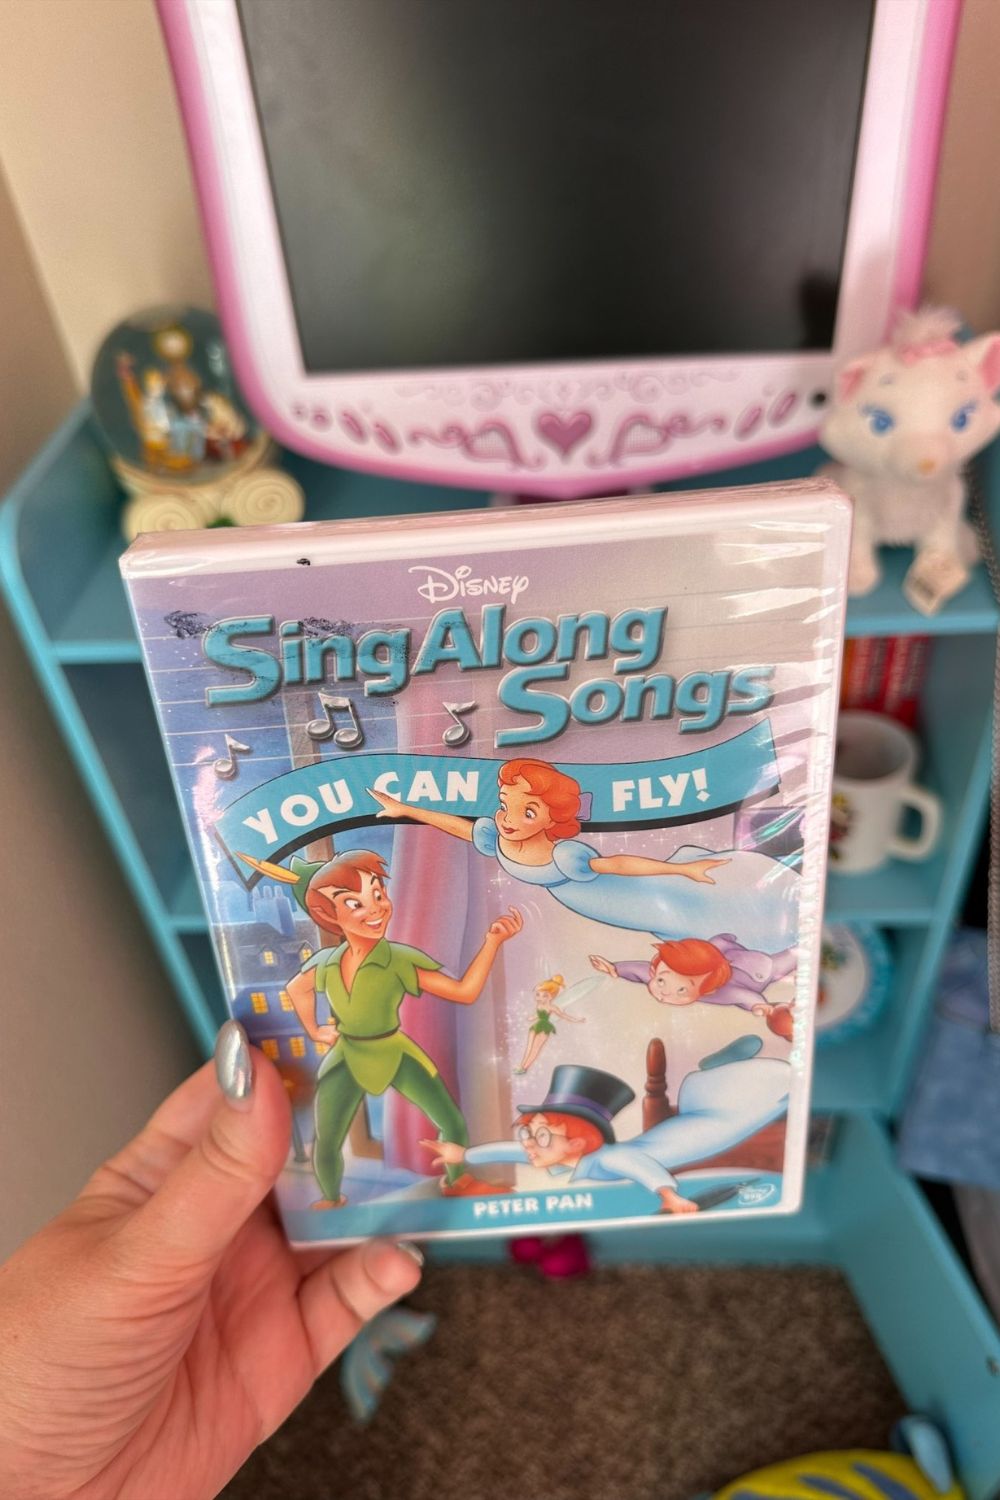 2006 SINGALONG SONGS - YOU CAN FLY! DVD (UNOPENED)*